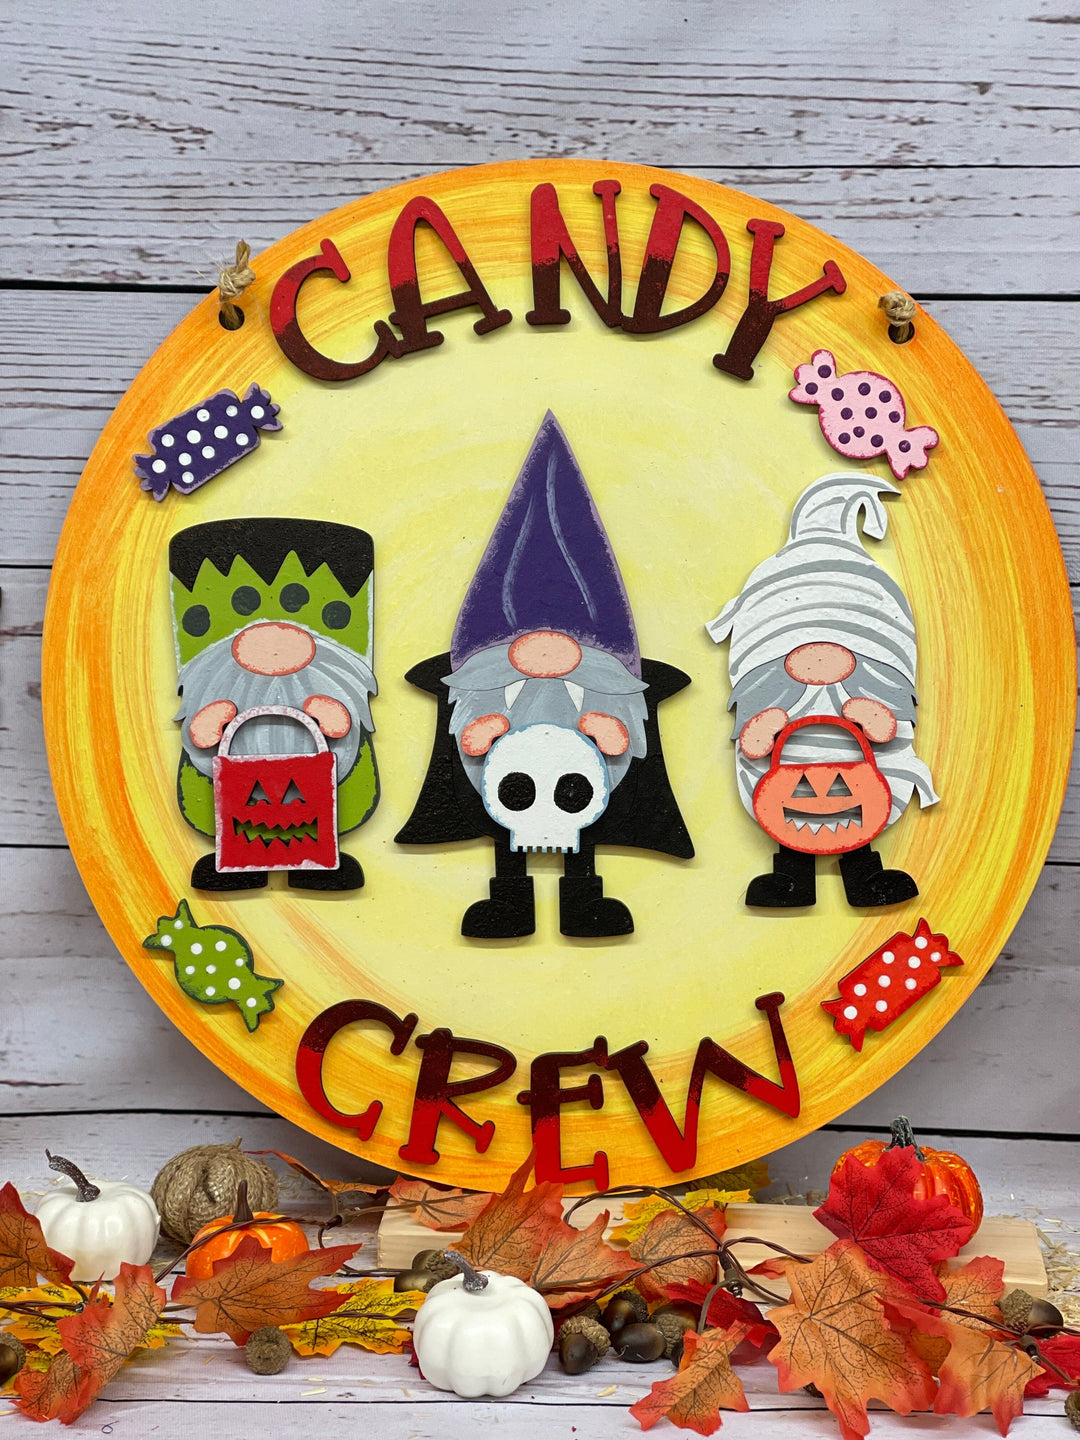 Candy Crew Round Indoor Sign Blank Ready to be Painted by You